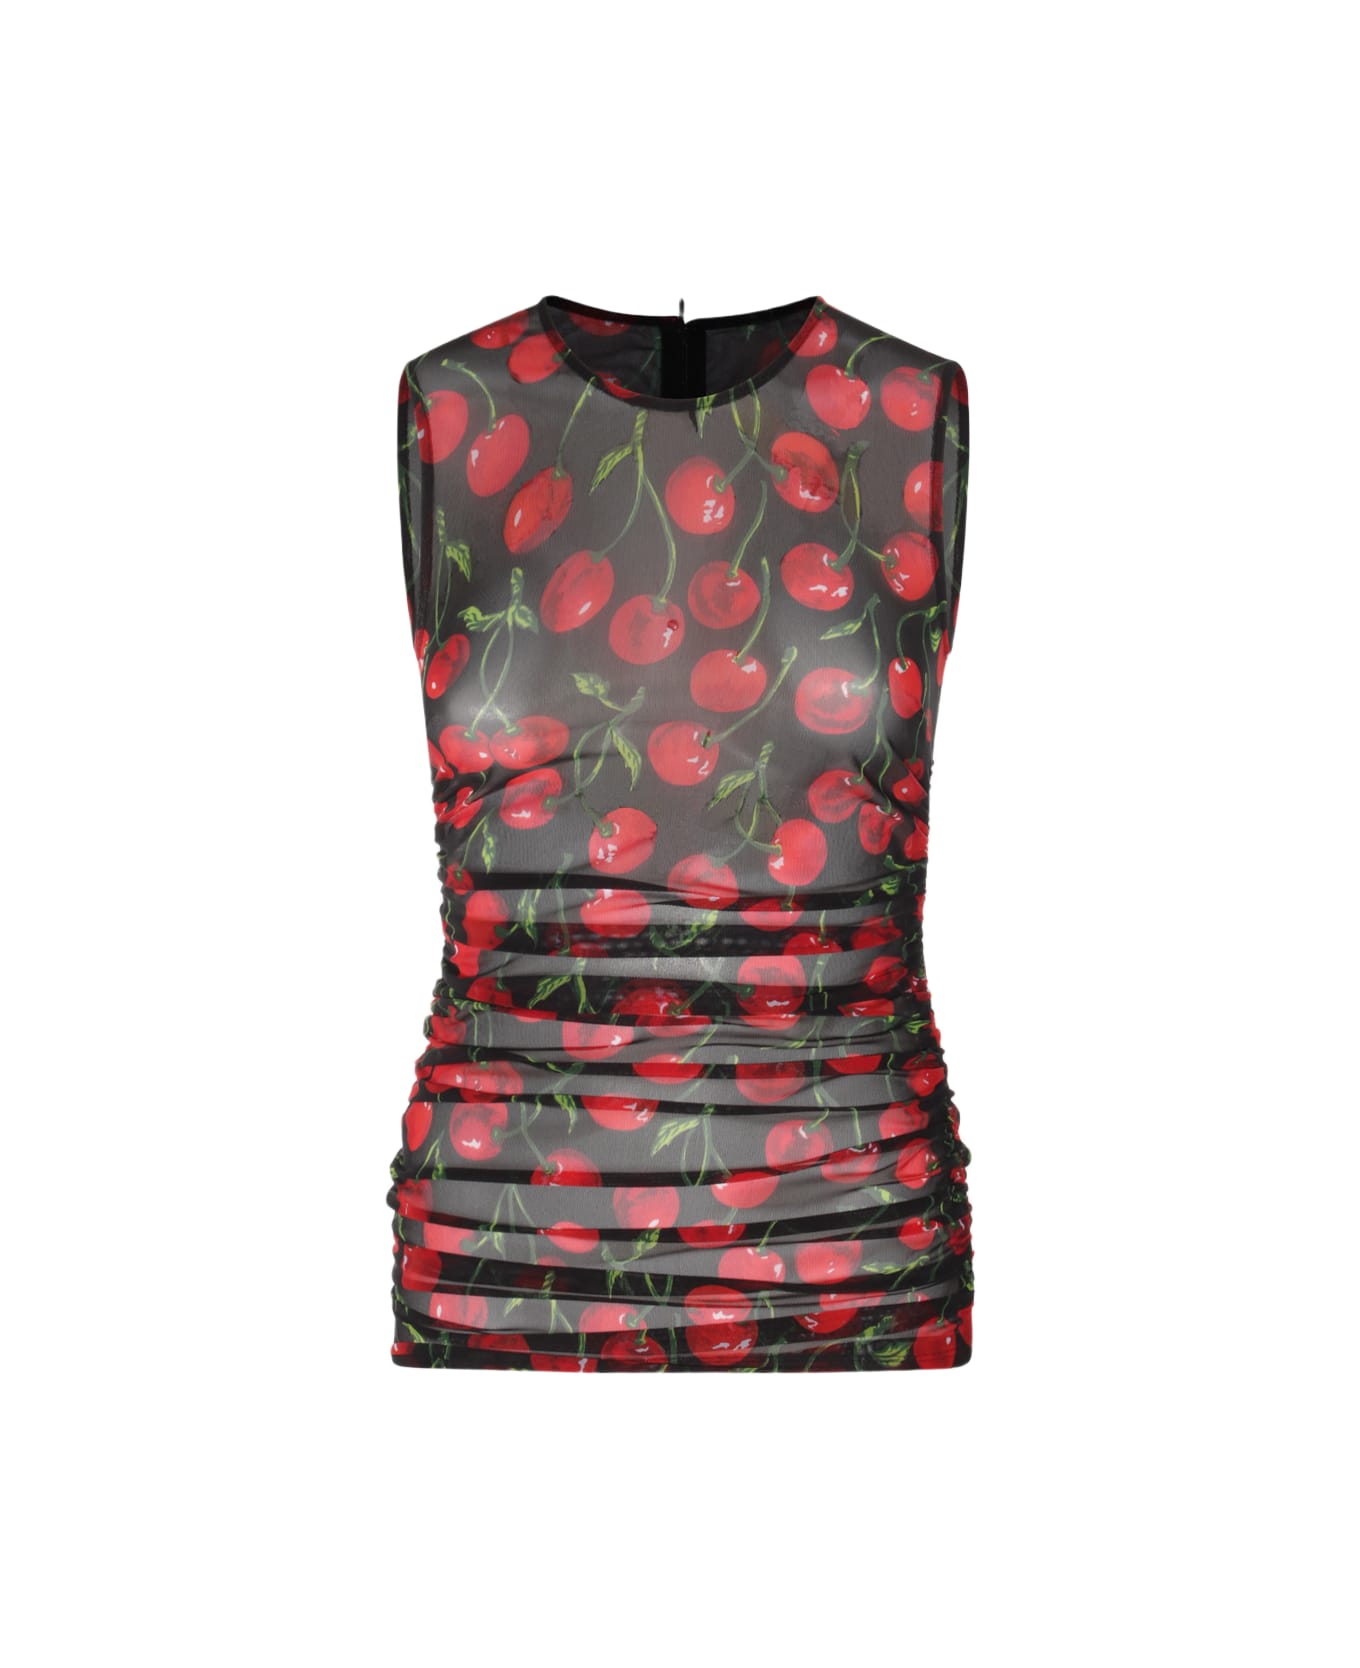 Dolce & Gabbana Black, Red And Green Top - CILIEGIE